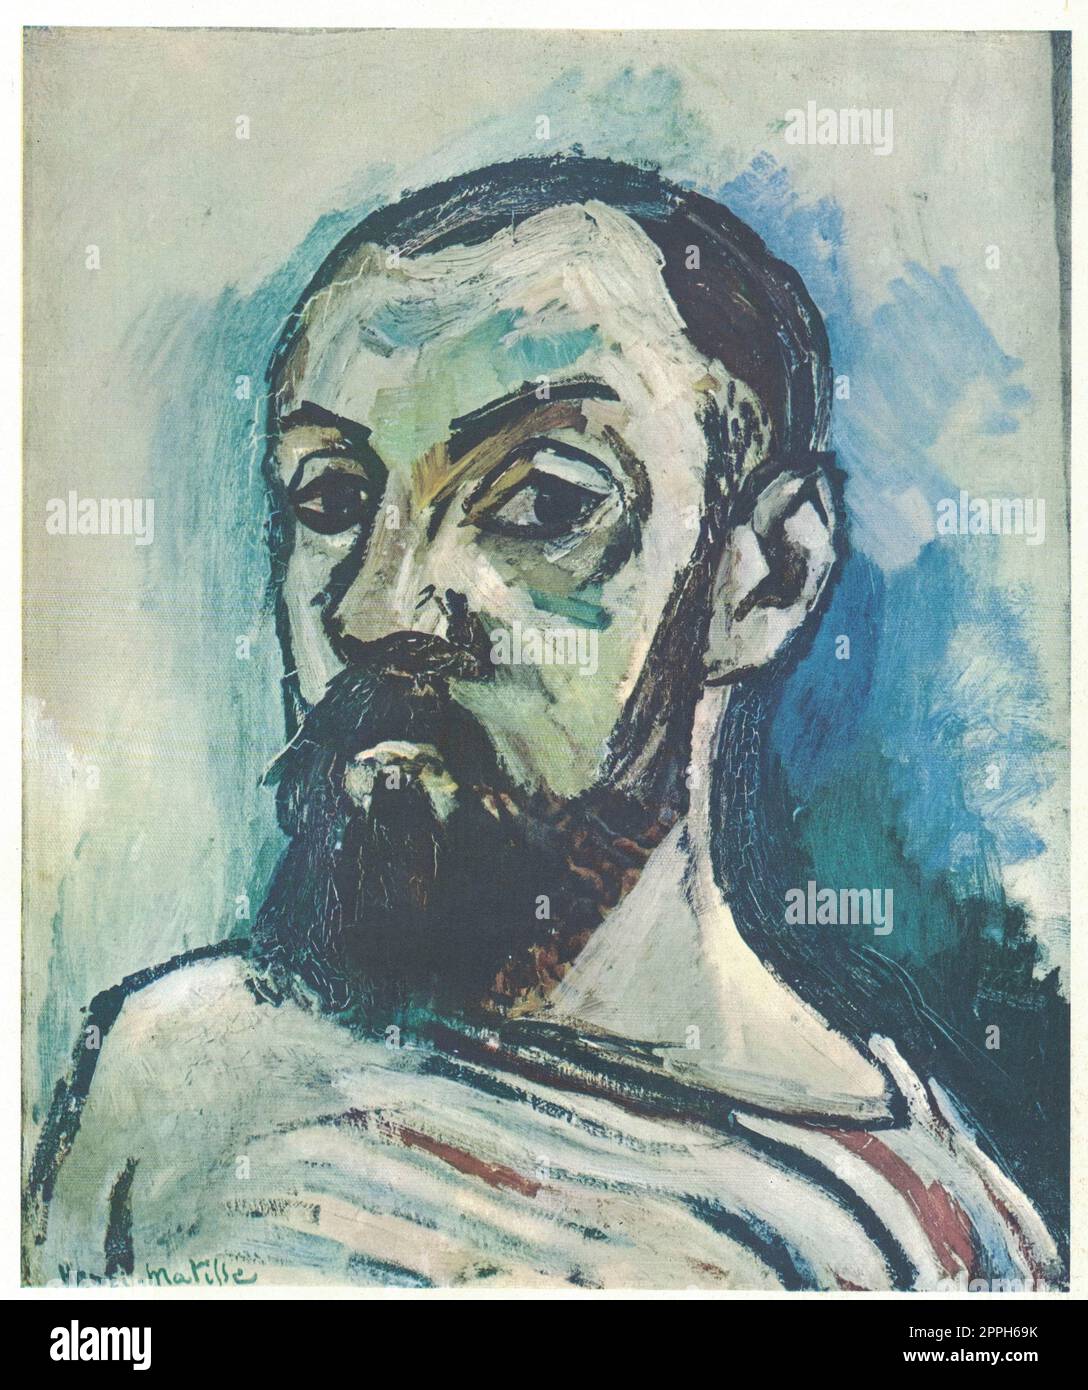 Self-portrait. Henri Emile Benoit Matisse, 31 December 1869 - 3 November 1954, was a French visual artist, known for both his use of colour and his fluid and original draughtsmanship. He was a draughtsman, printmaker, and sculptor, but is known primarily Stock Photo